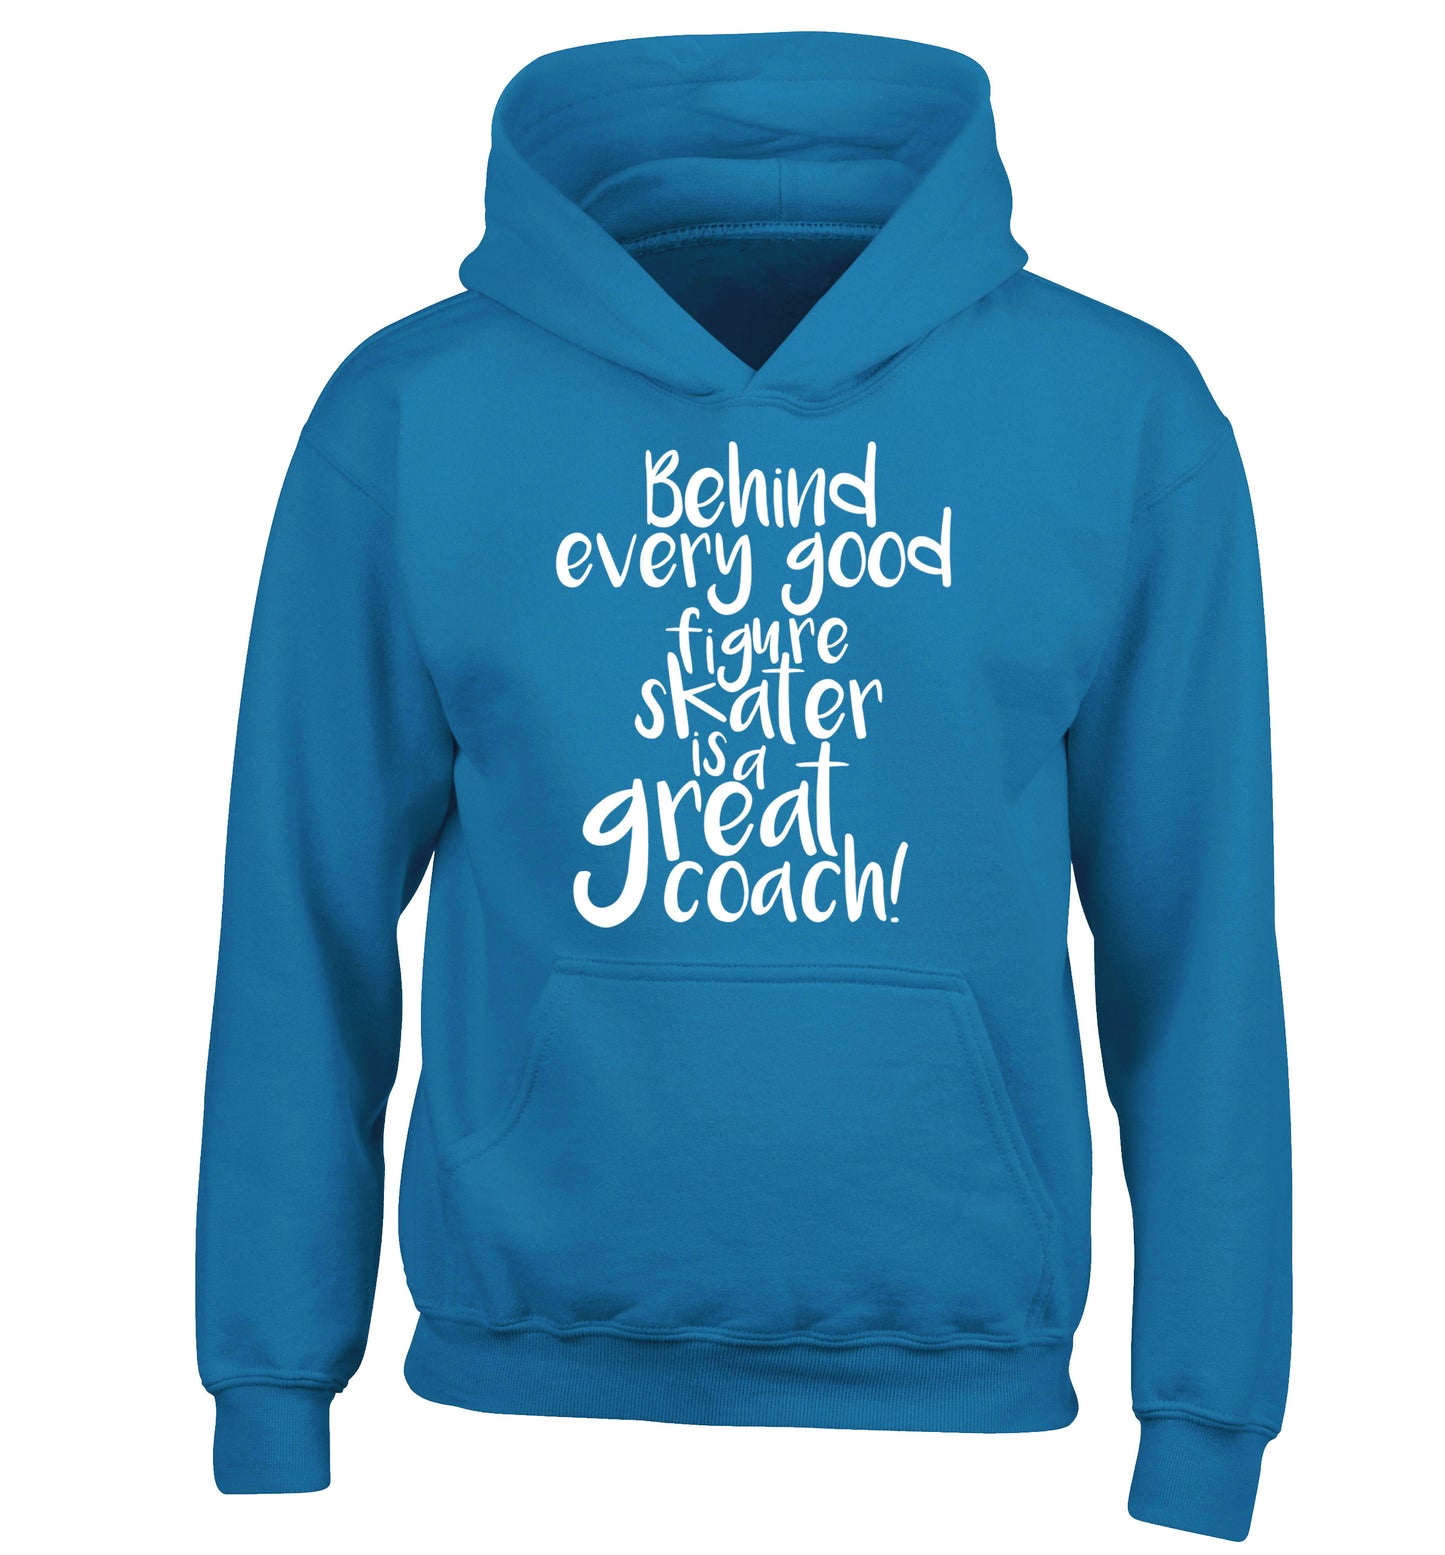 Behind every good figure skater is a great coach children's blue hoodie 12-14 Years